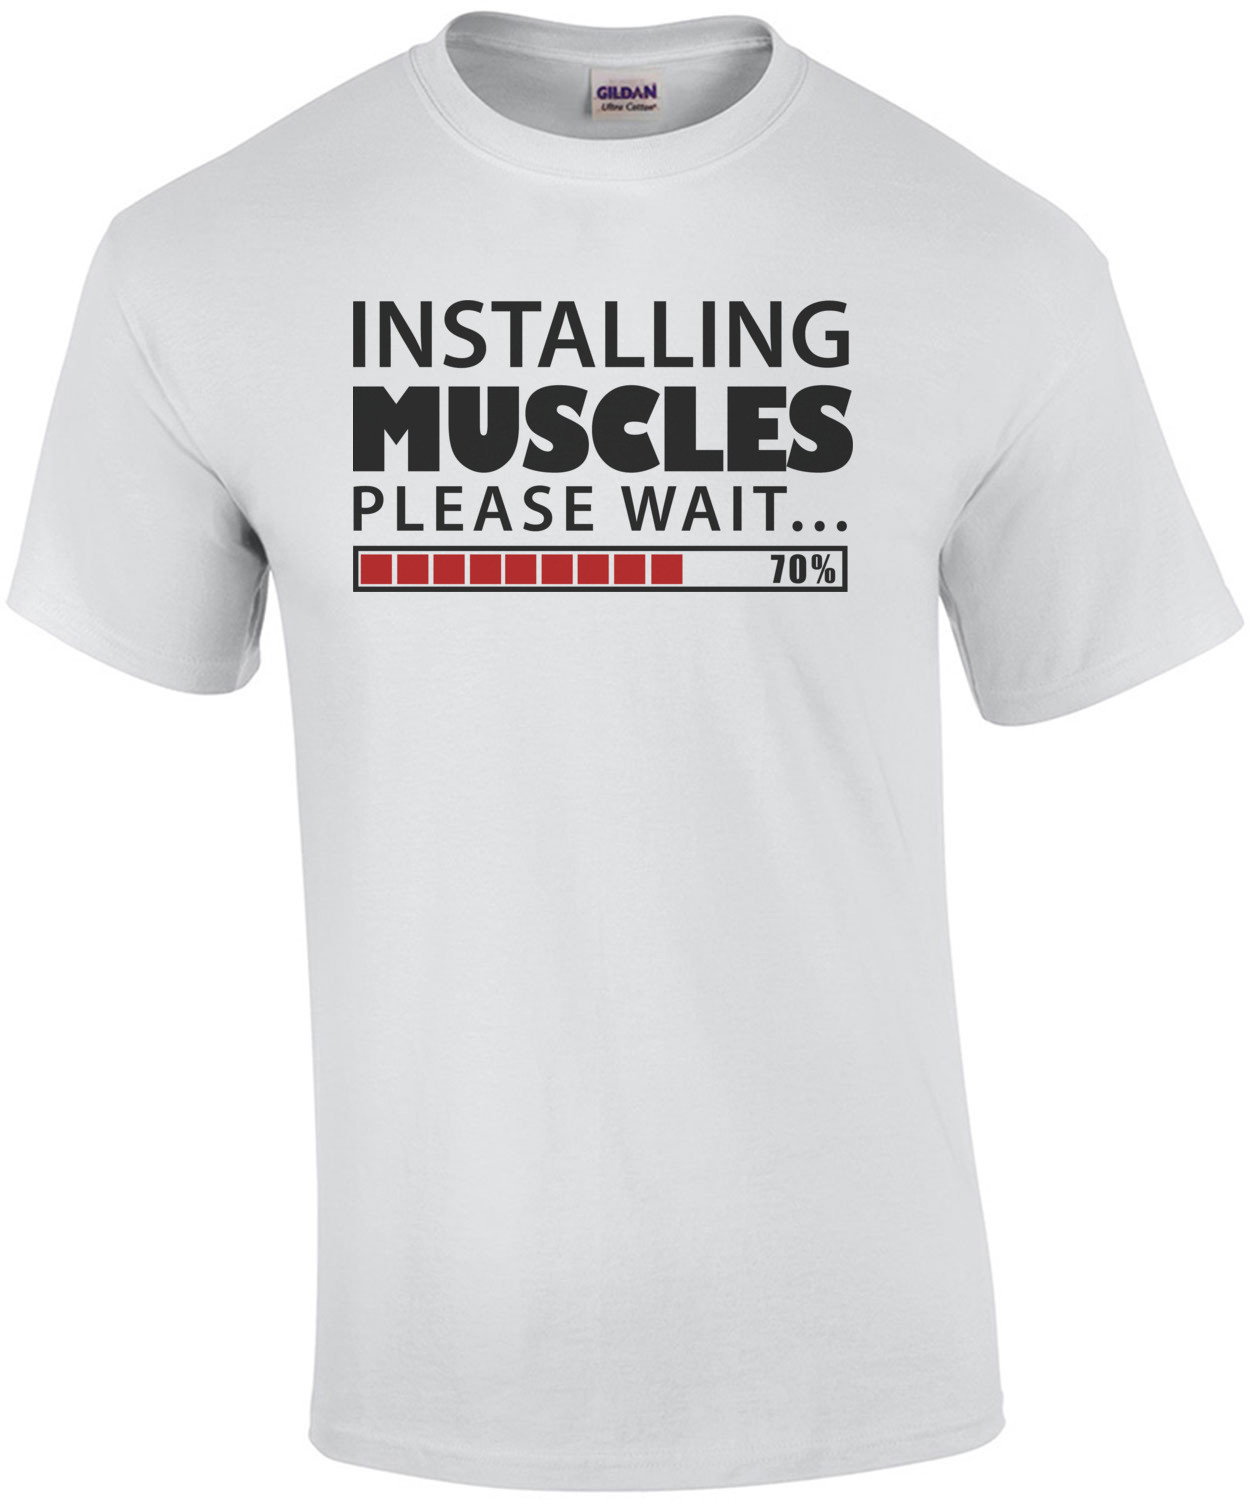 Installing Muscles. Please Wait. Funny Work Out